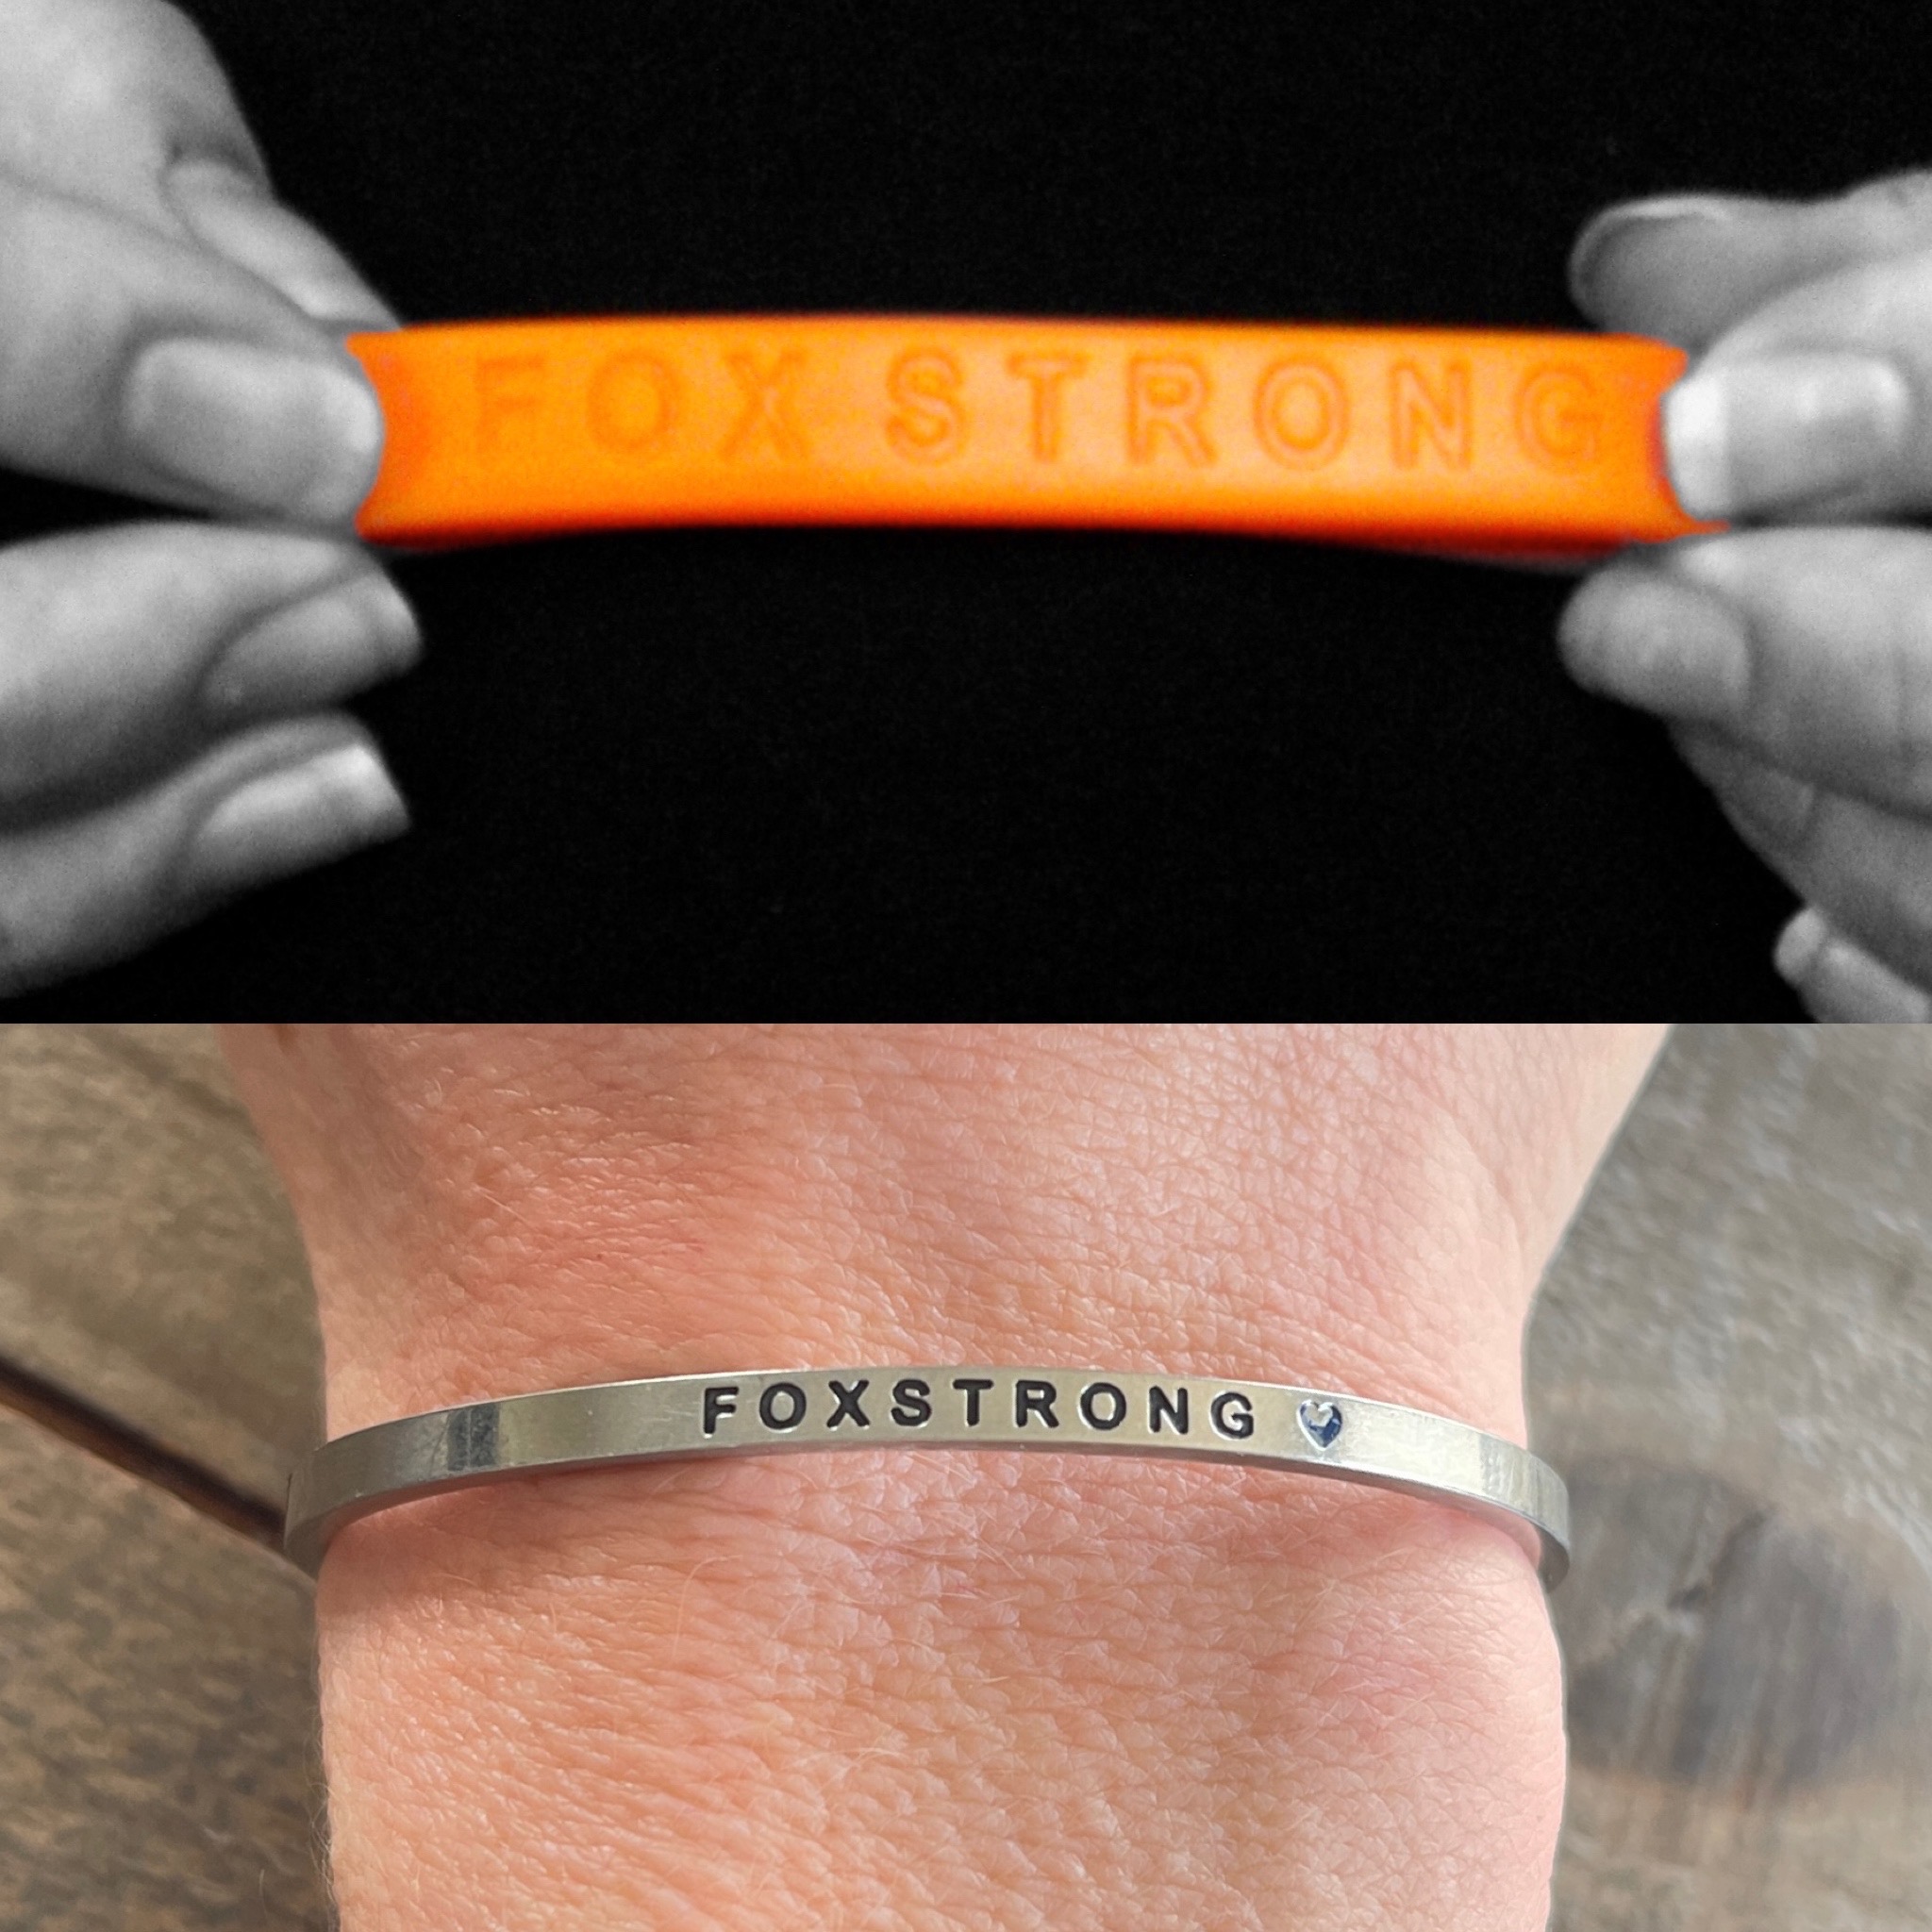 Rebecca Fox's fundraising page for LIVESTRONG